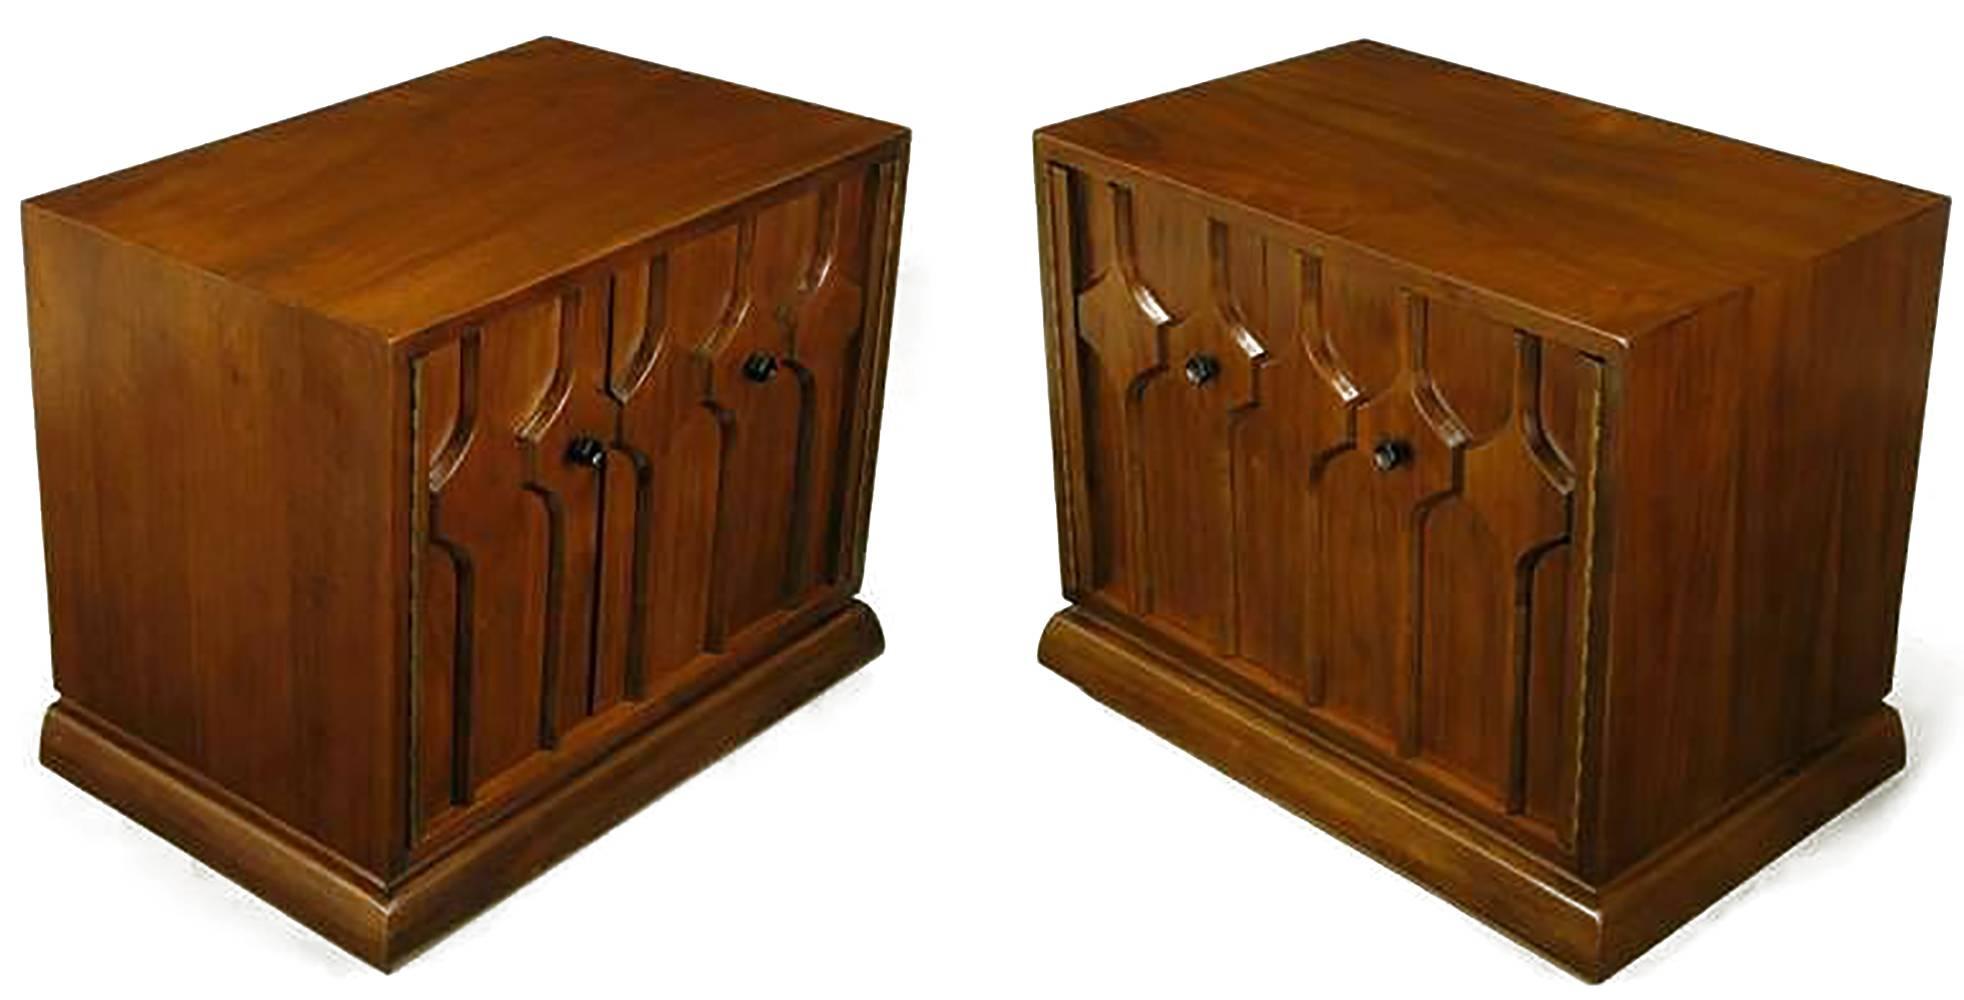 Pair of walnut two-door nightstands with carved hexagonal relief front doors. Two piano hinged doors open via black iron hexagonal pulls to reveal single shelf two-section interiors. Heavily built, with quality on par with Baker Furniture or